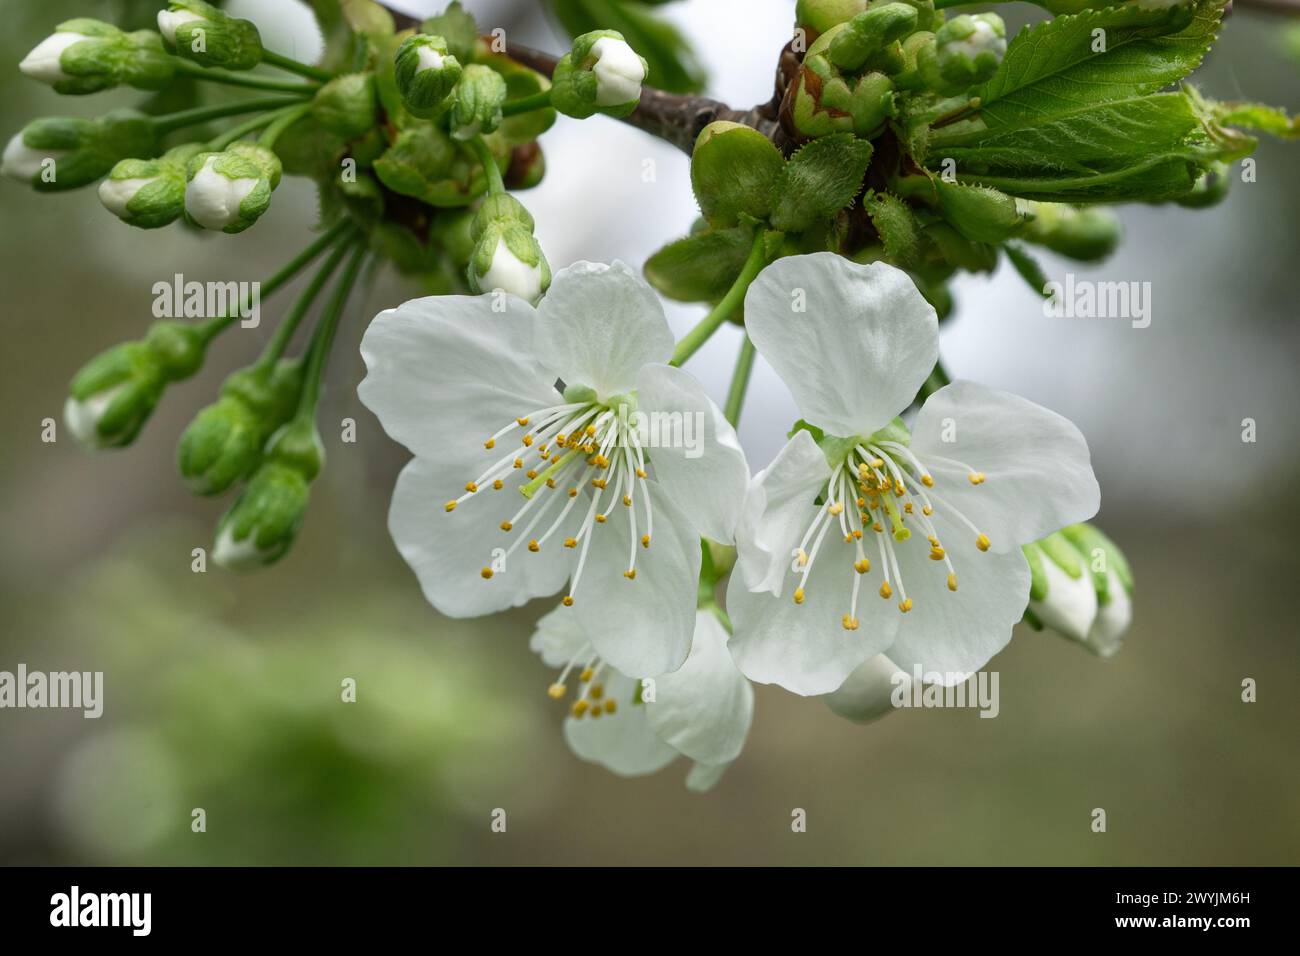 Buds and blossoms of cherry variety Dönissens gelbe Knorpelkirsche Stock Photo